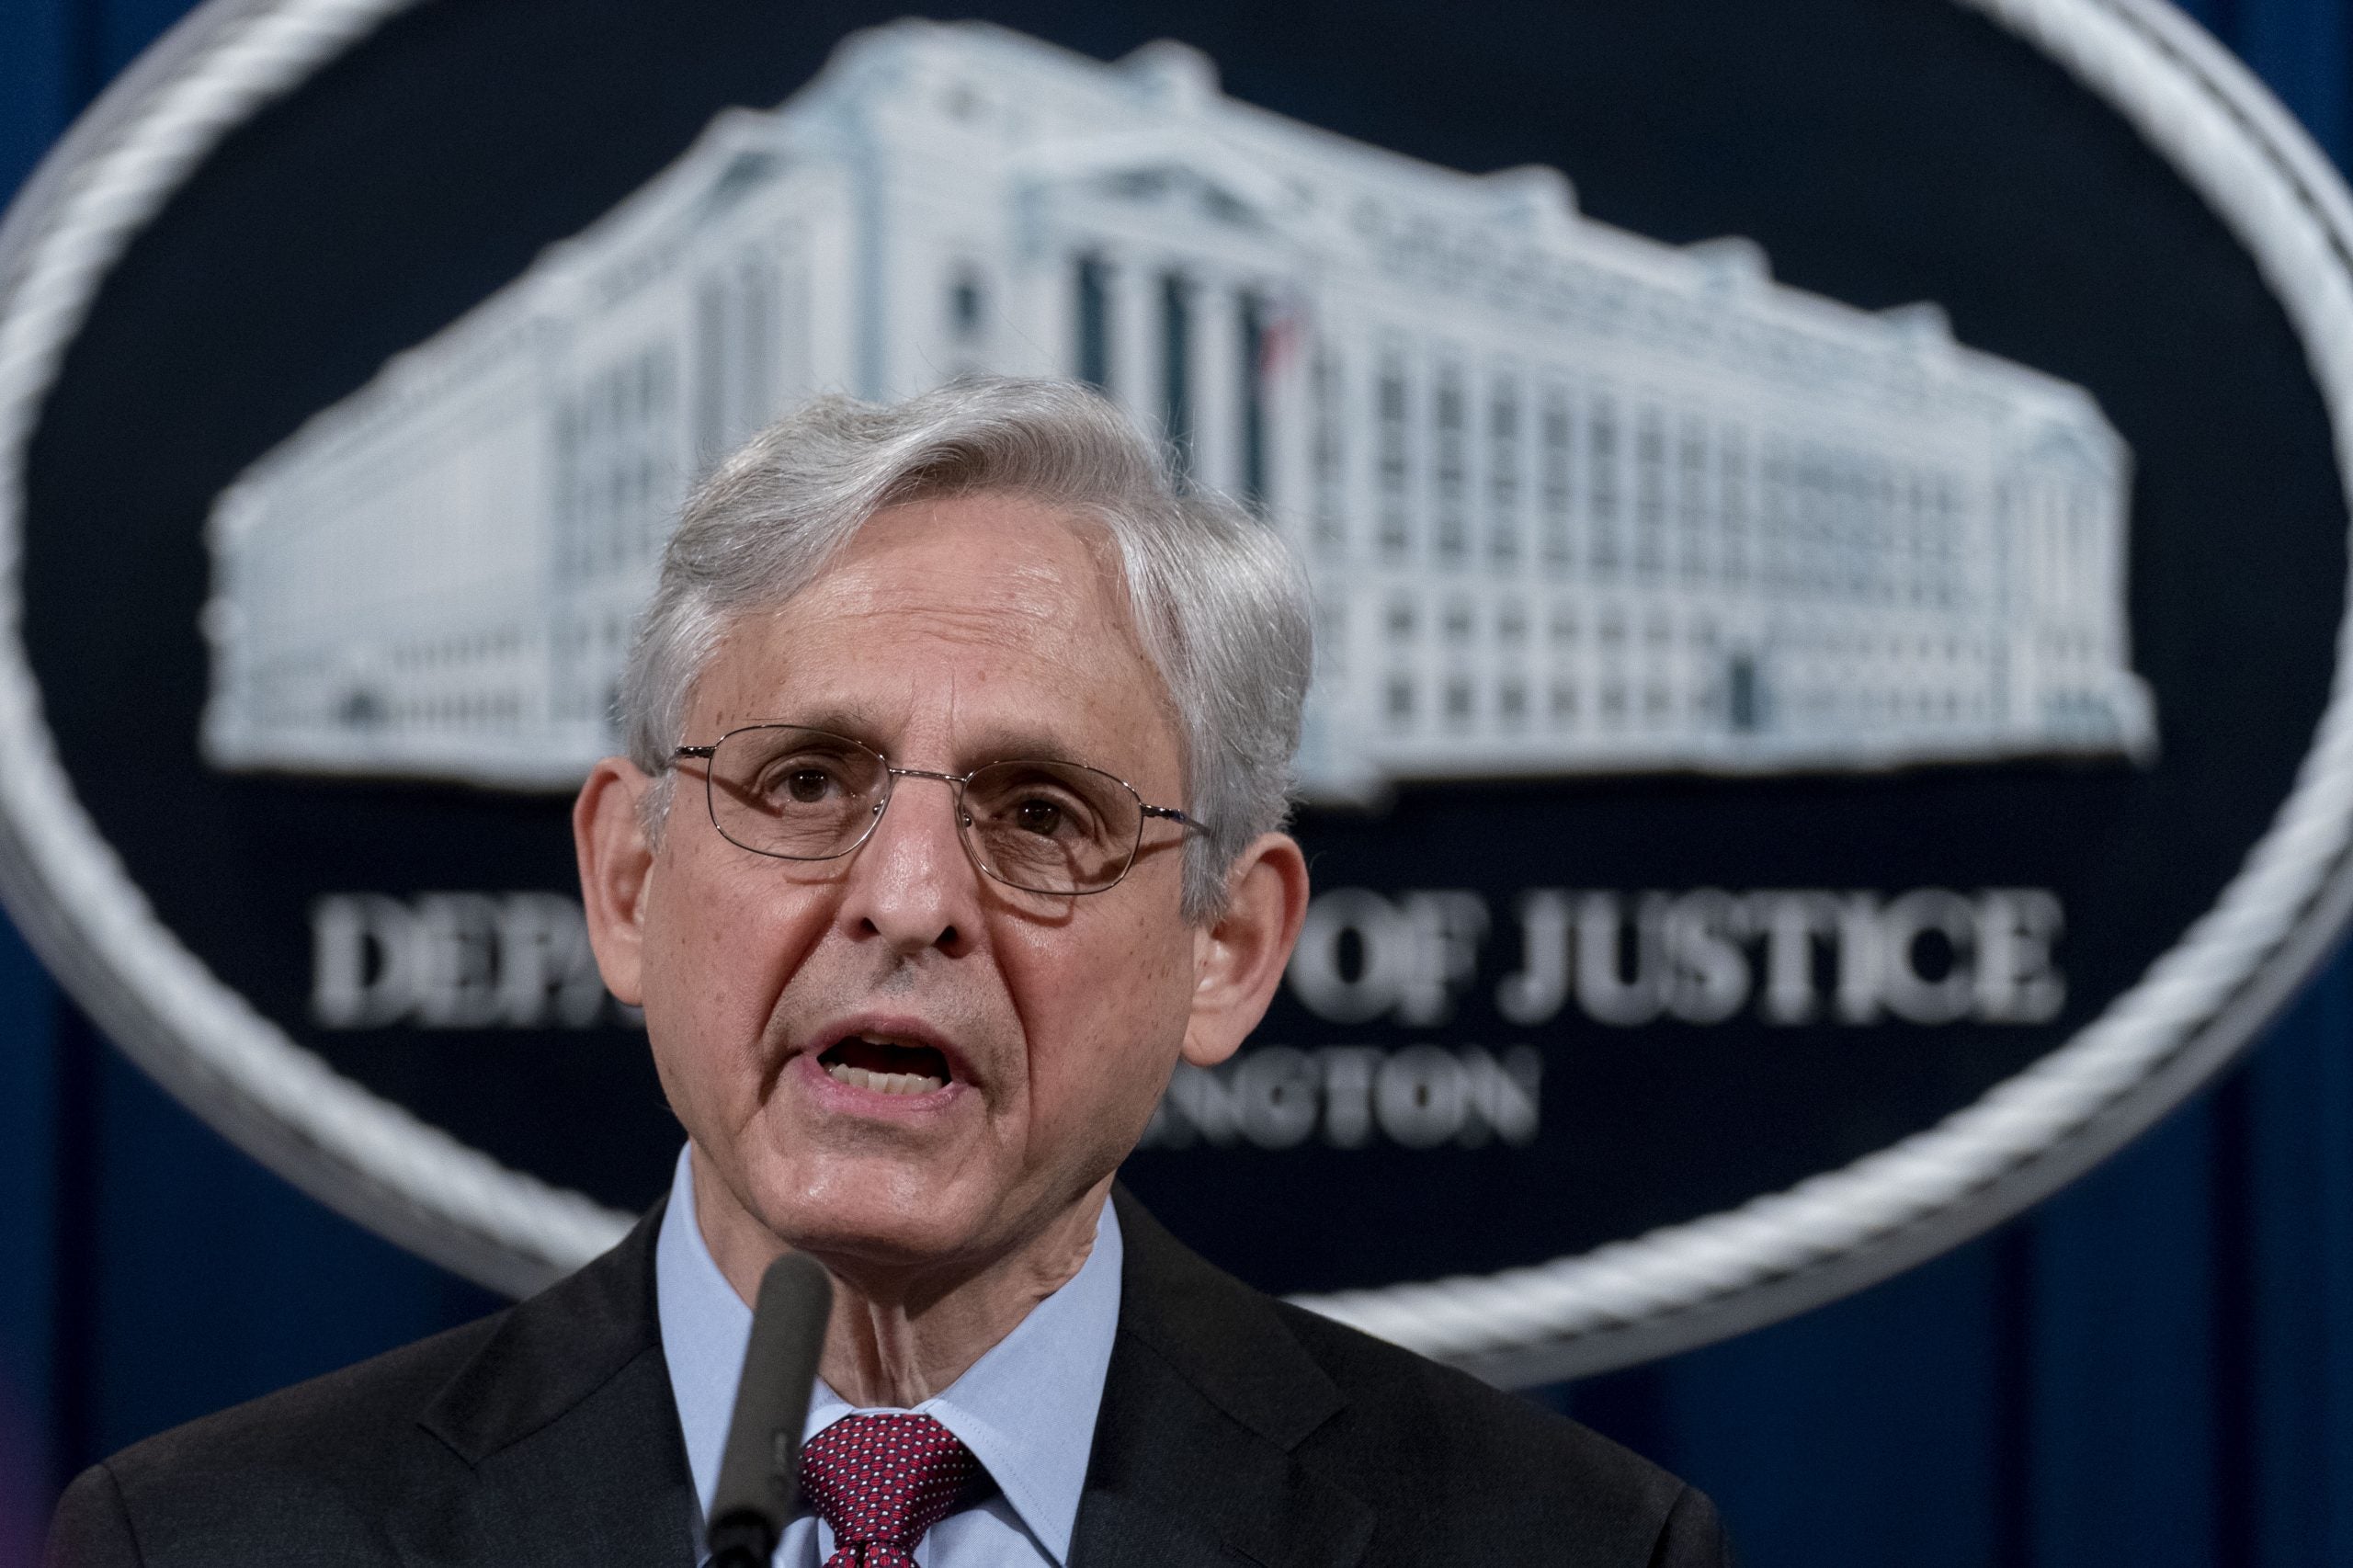 Attorney General Merrick Garland Announces Plans to Protect Voting Rights